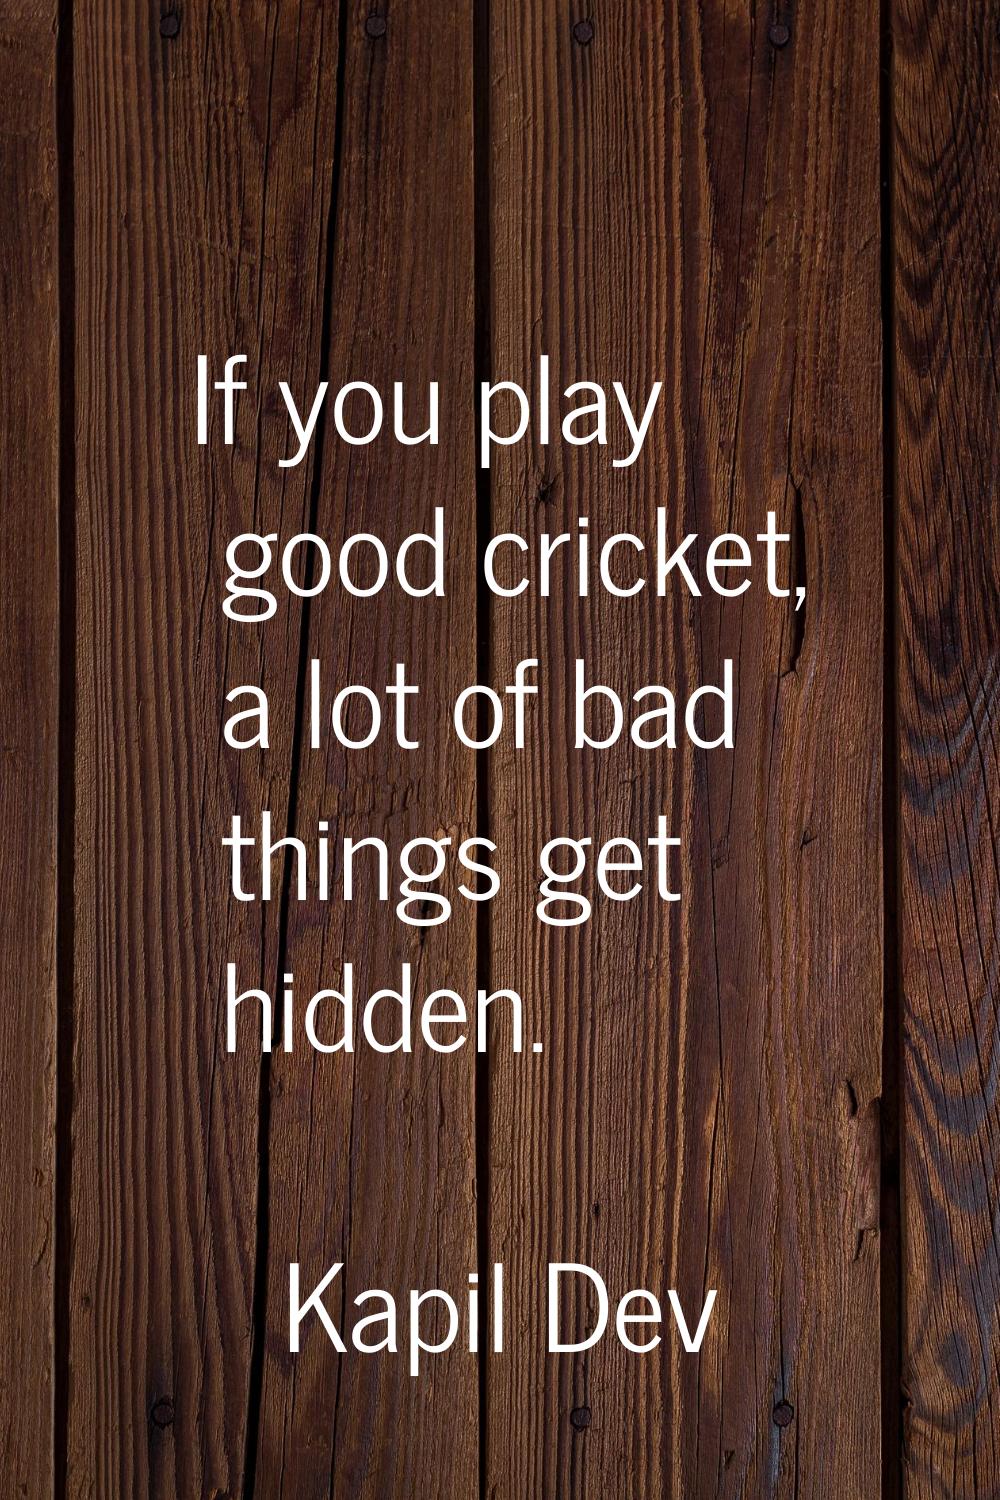 If you play good cricket, a lot of bad things get hidden.